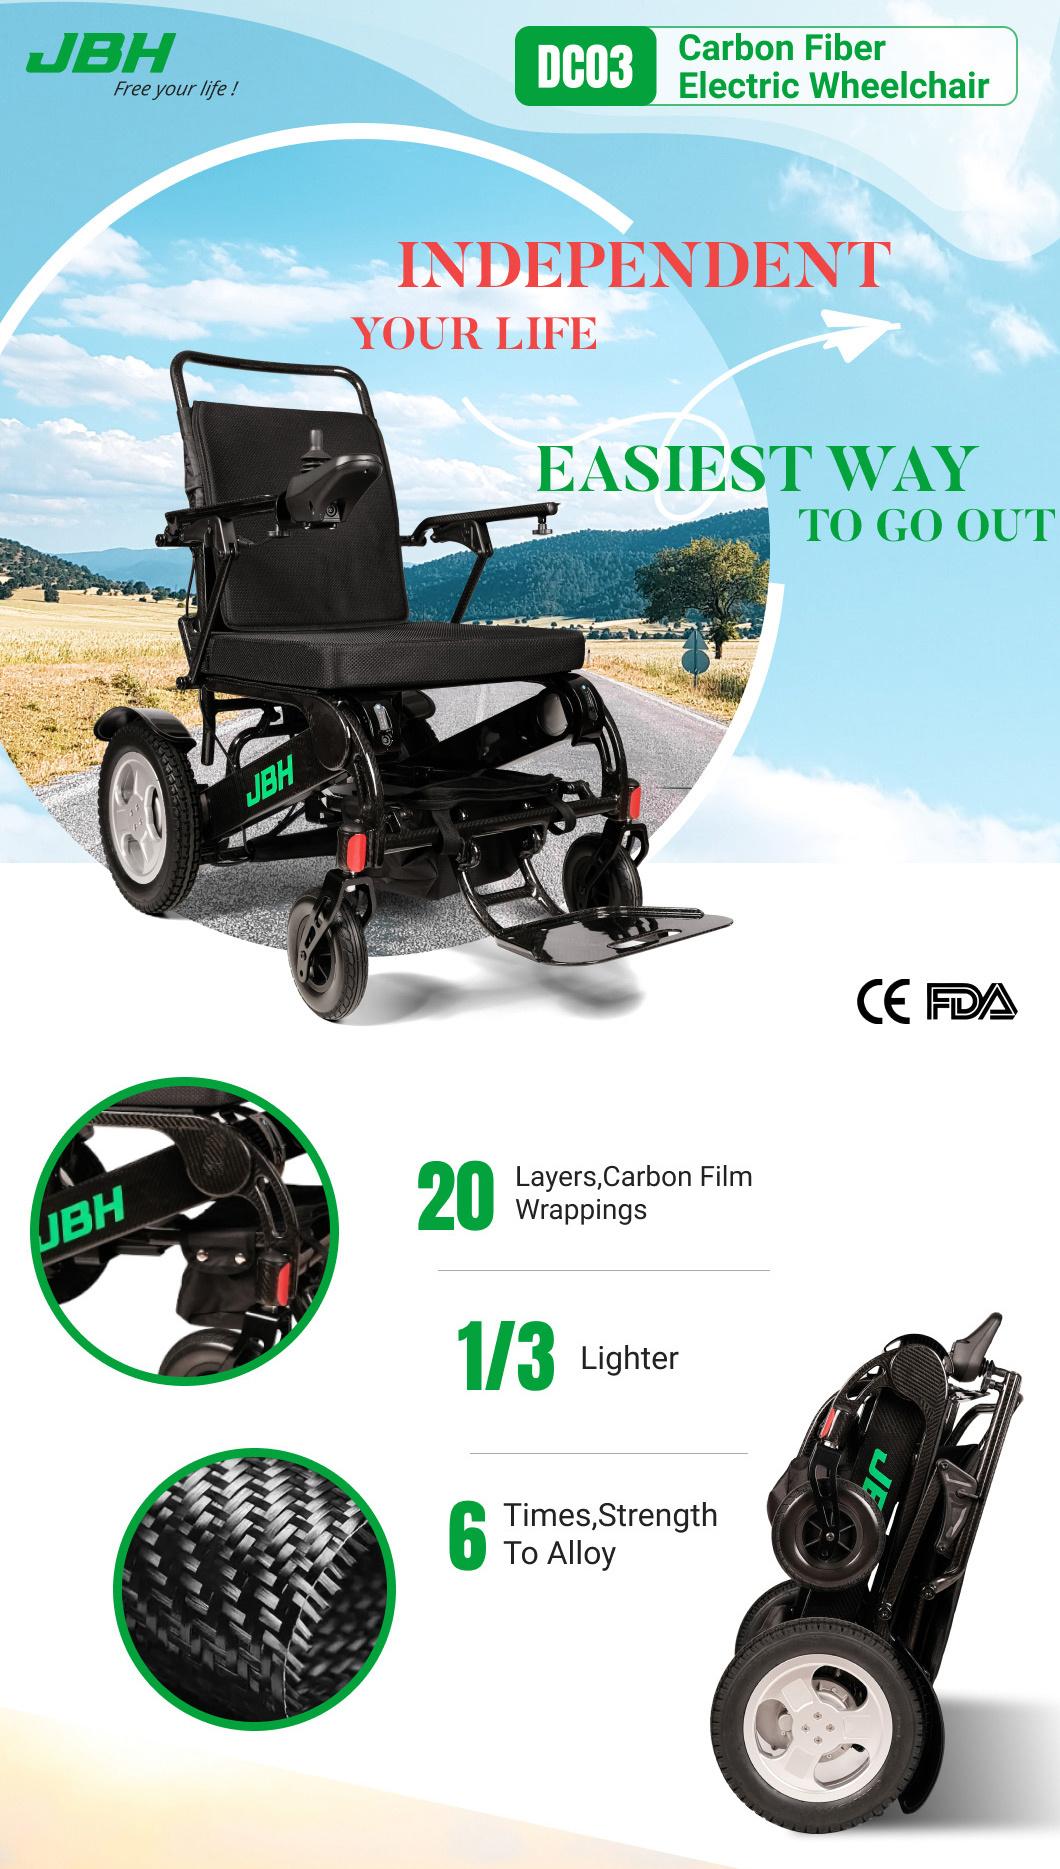 New Products Lightweight Folding Professional Carbon Fiber Seat Wheelchair Fordisabled People